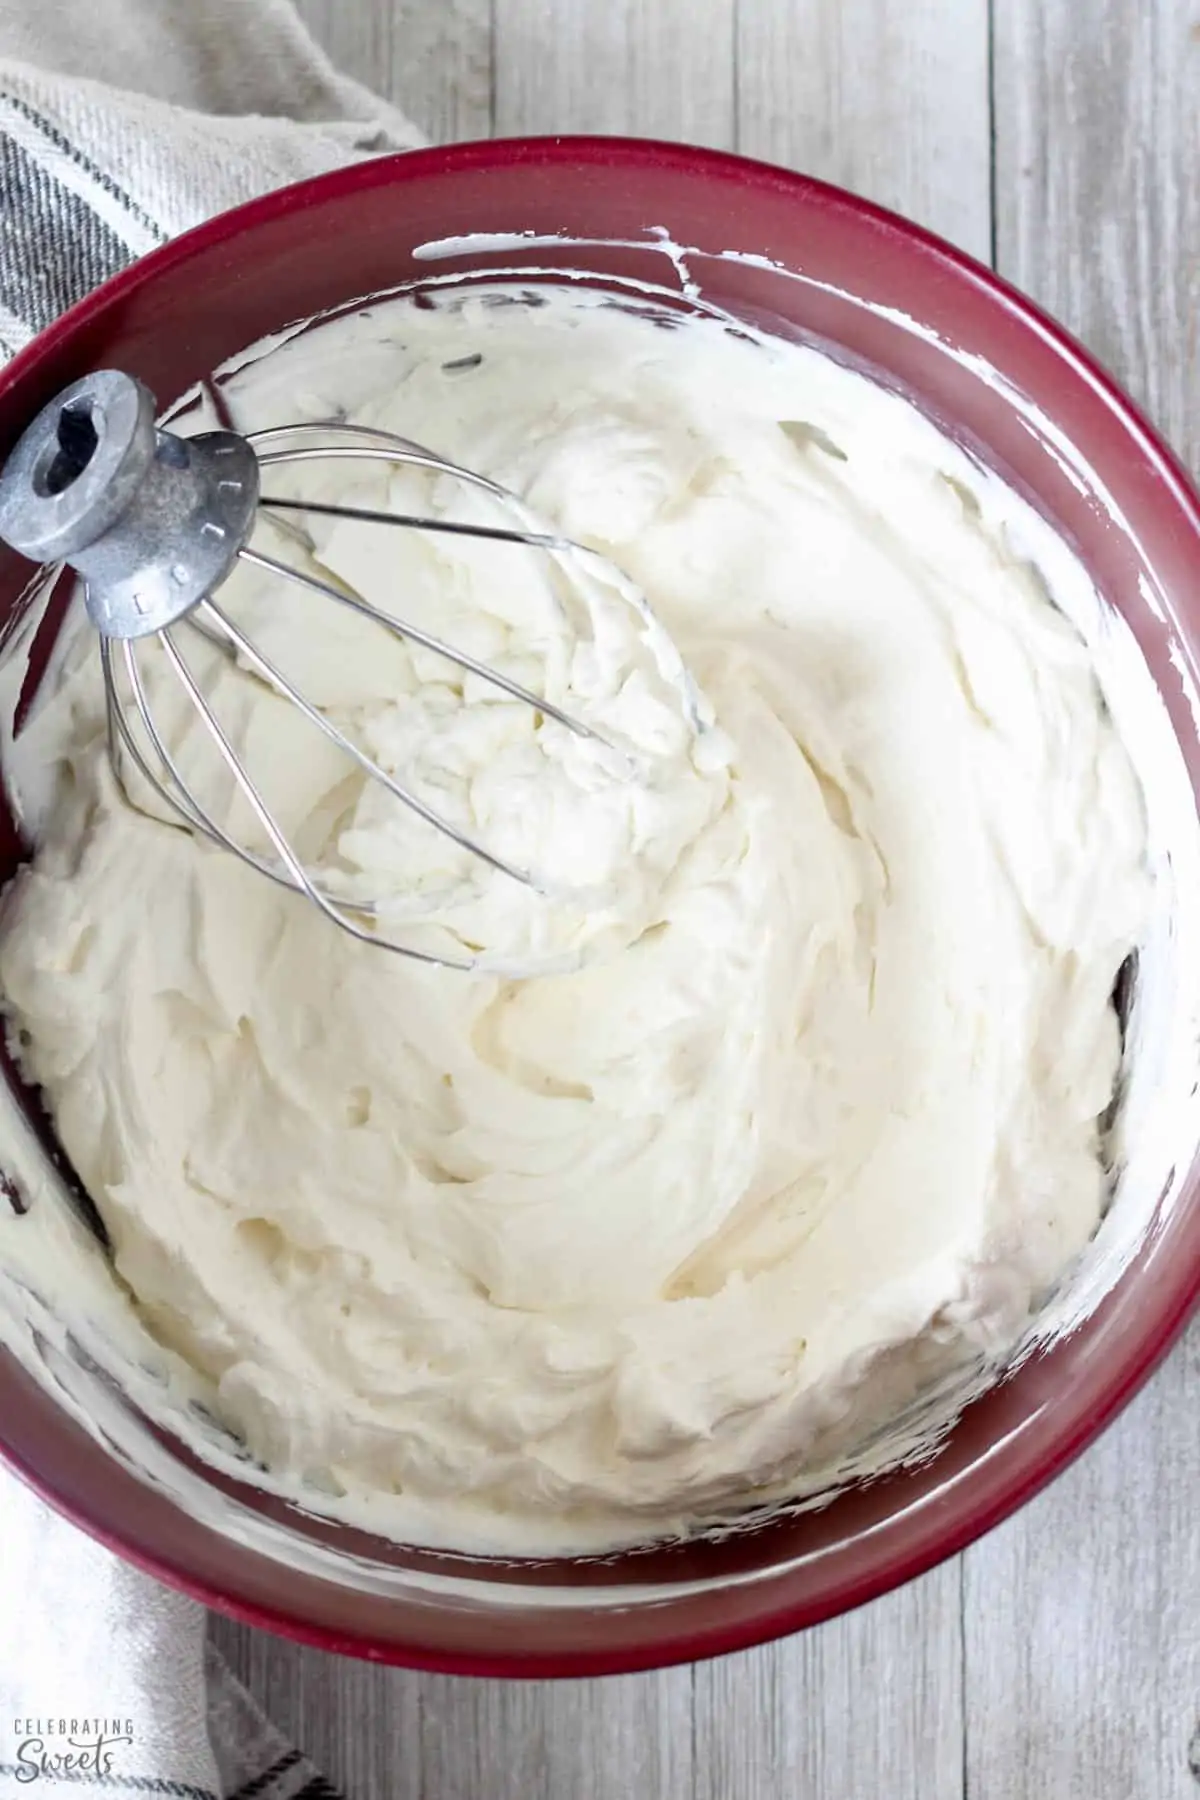 Homemade whipped cream in a red bowl with a stainless beater.